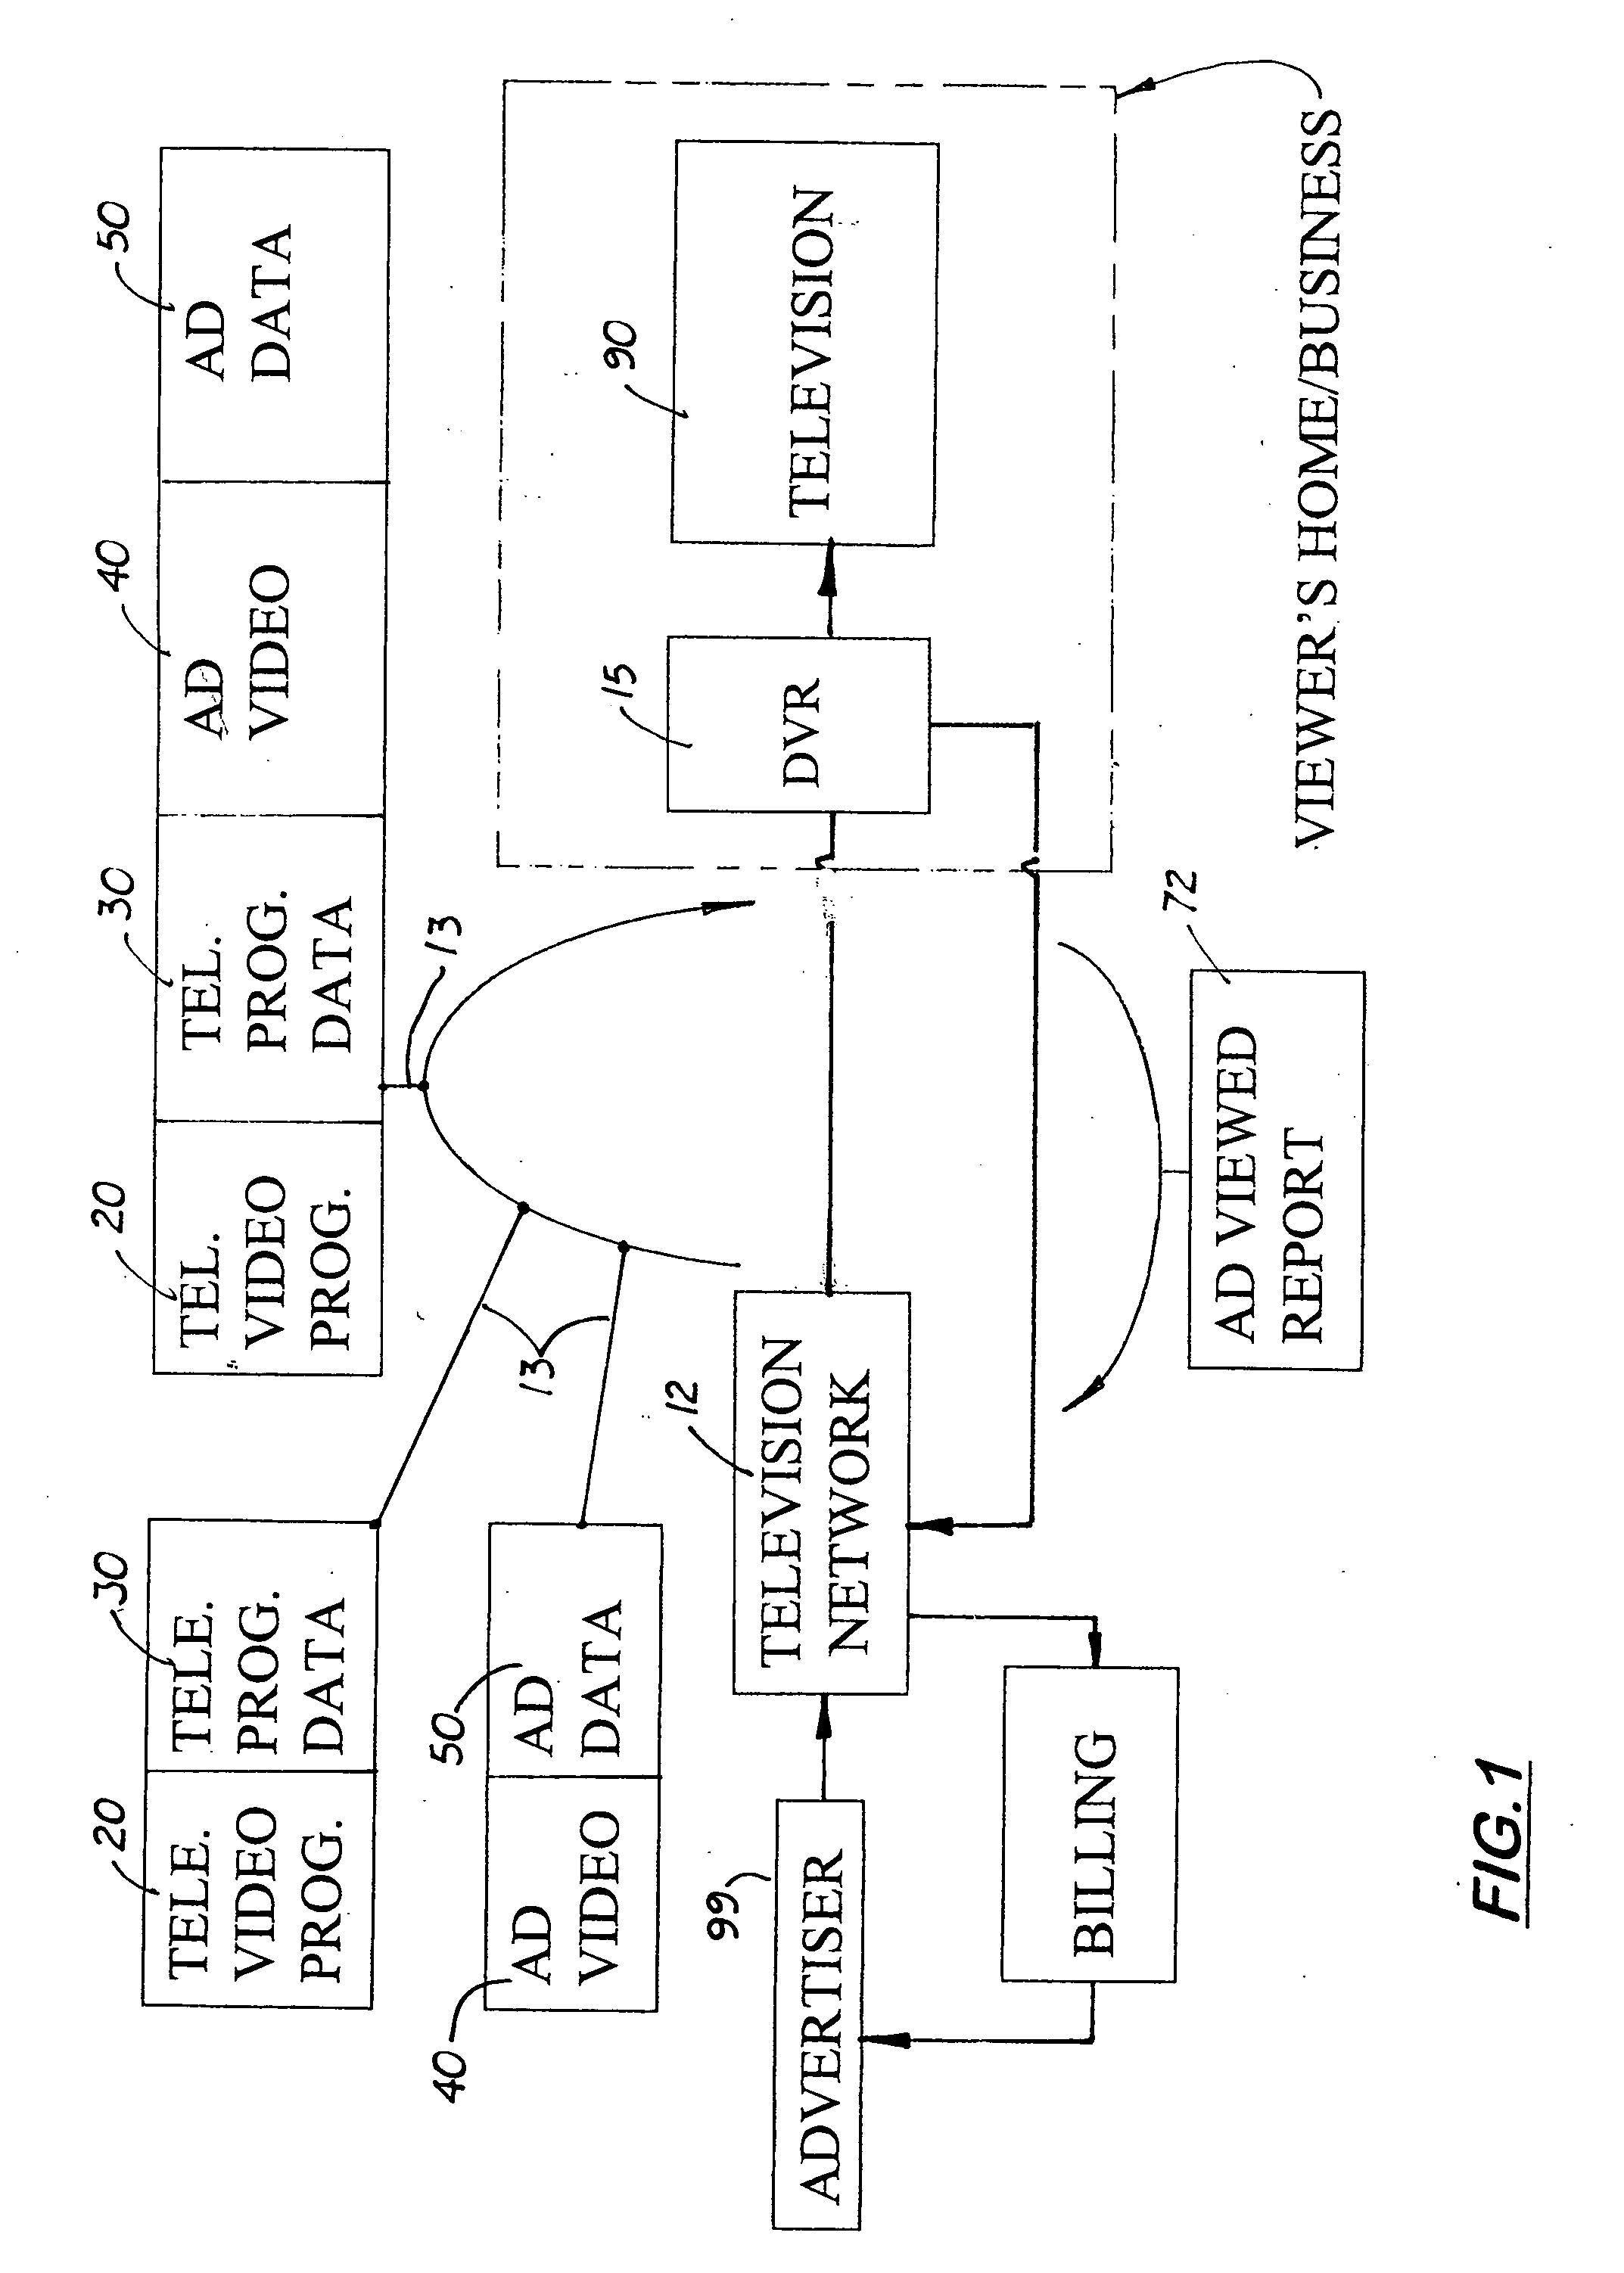 System and method for targeting video advertisements